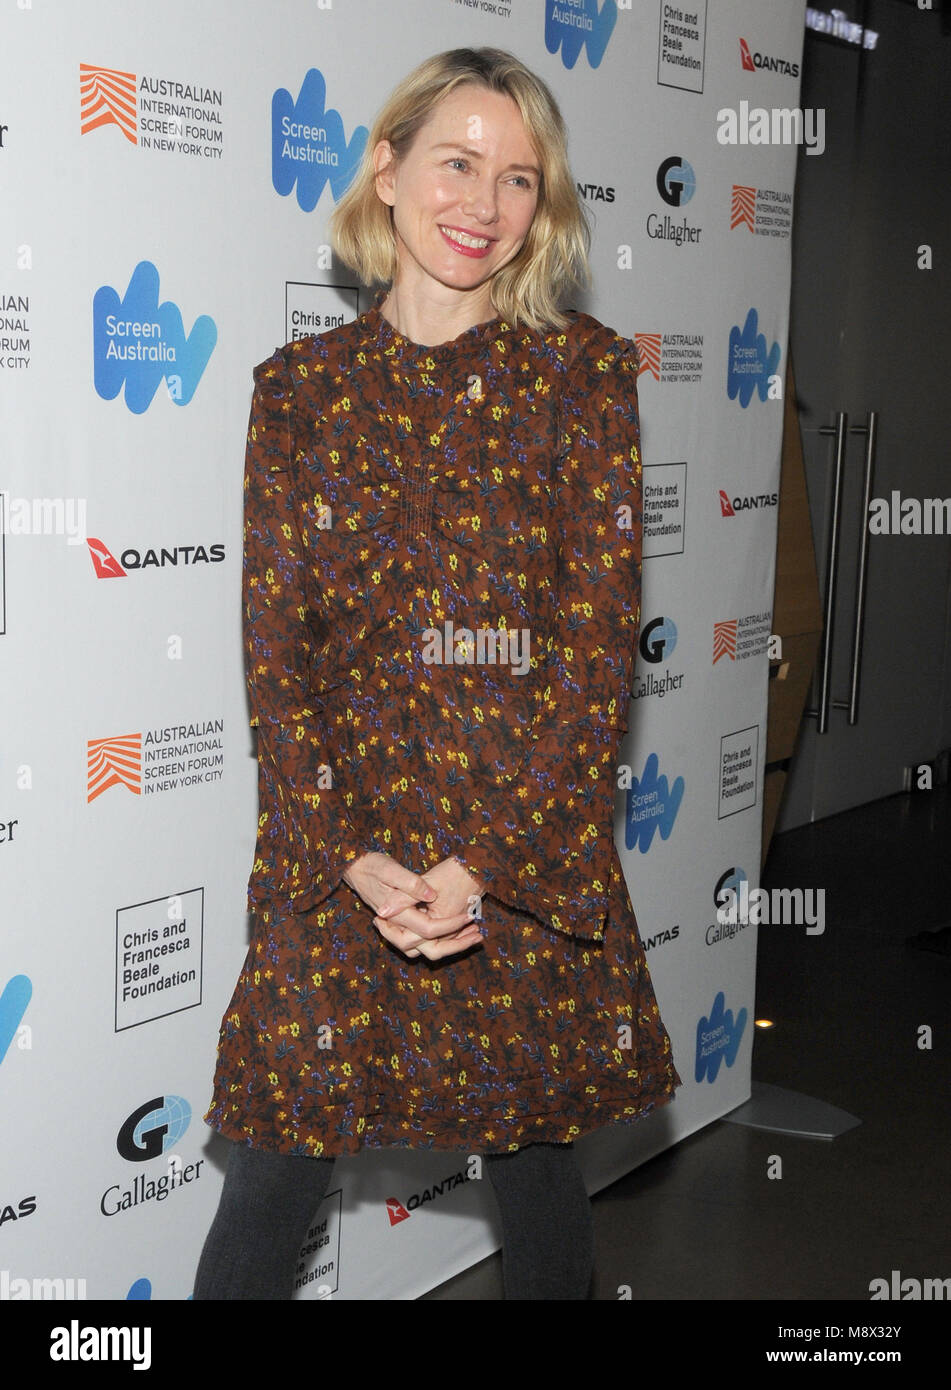 New York, NY, USA. 20th Mar, 2018. Actress Naomi Watts attend the 'Breath' premiere for the Australian International Screen Forum at Francesca Beale Theater on March 20, 2018 in New York City. Credit: John Palmer/Media Pnch/Alamy Live News Stock Photo